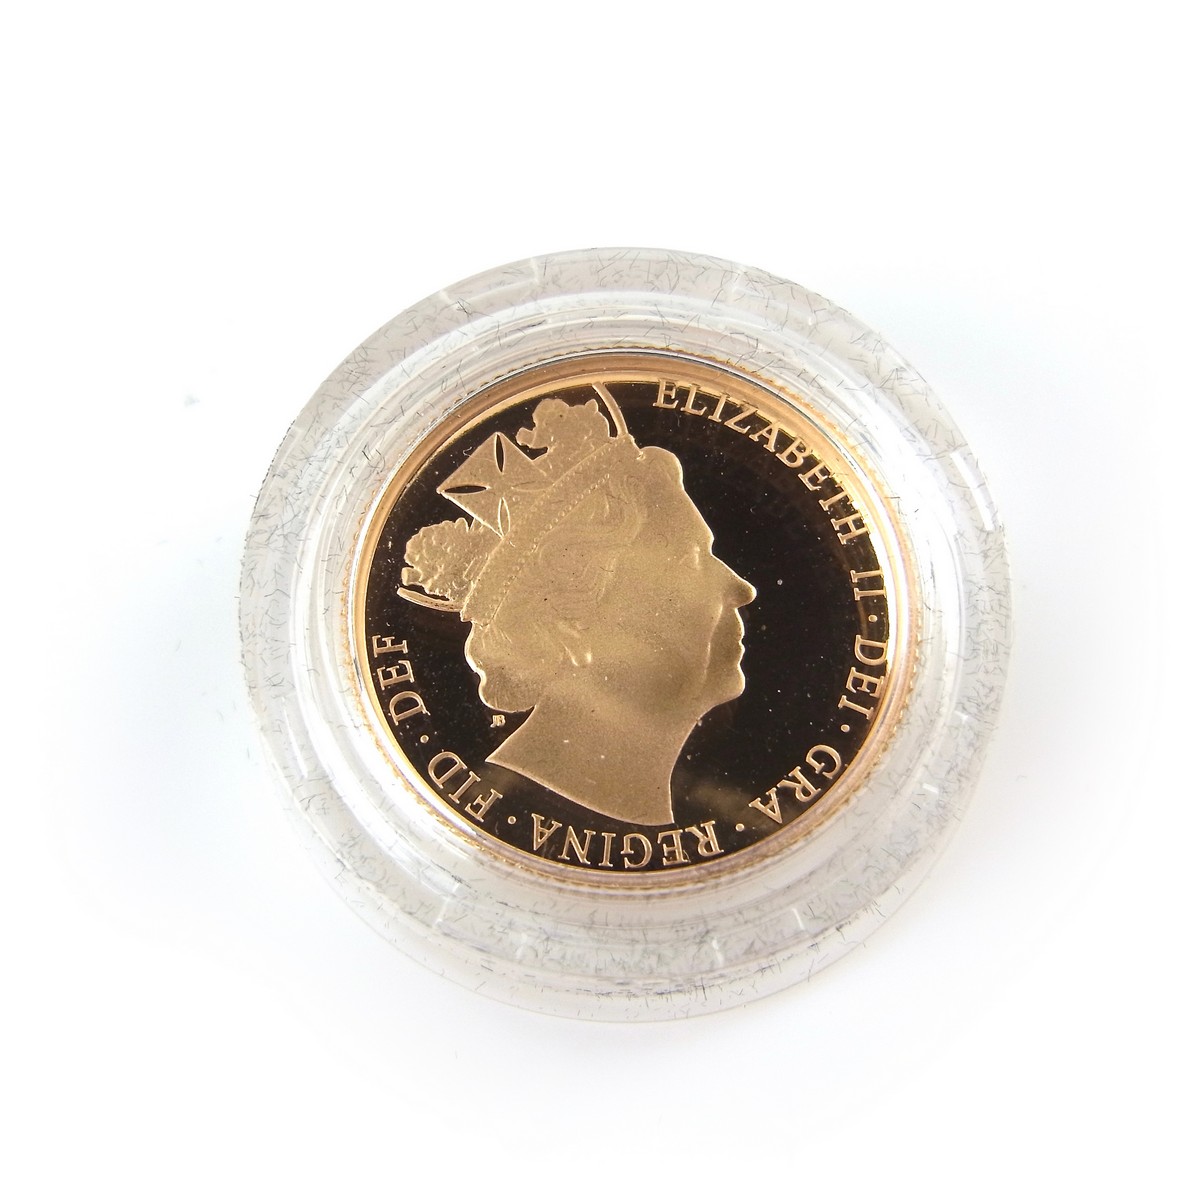 Limited edition 2016 gold proof sovereign. James Butler limited release portrait. - Image 2 of 3